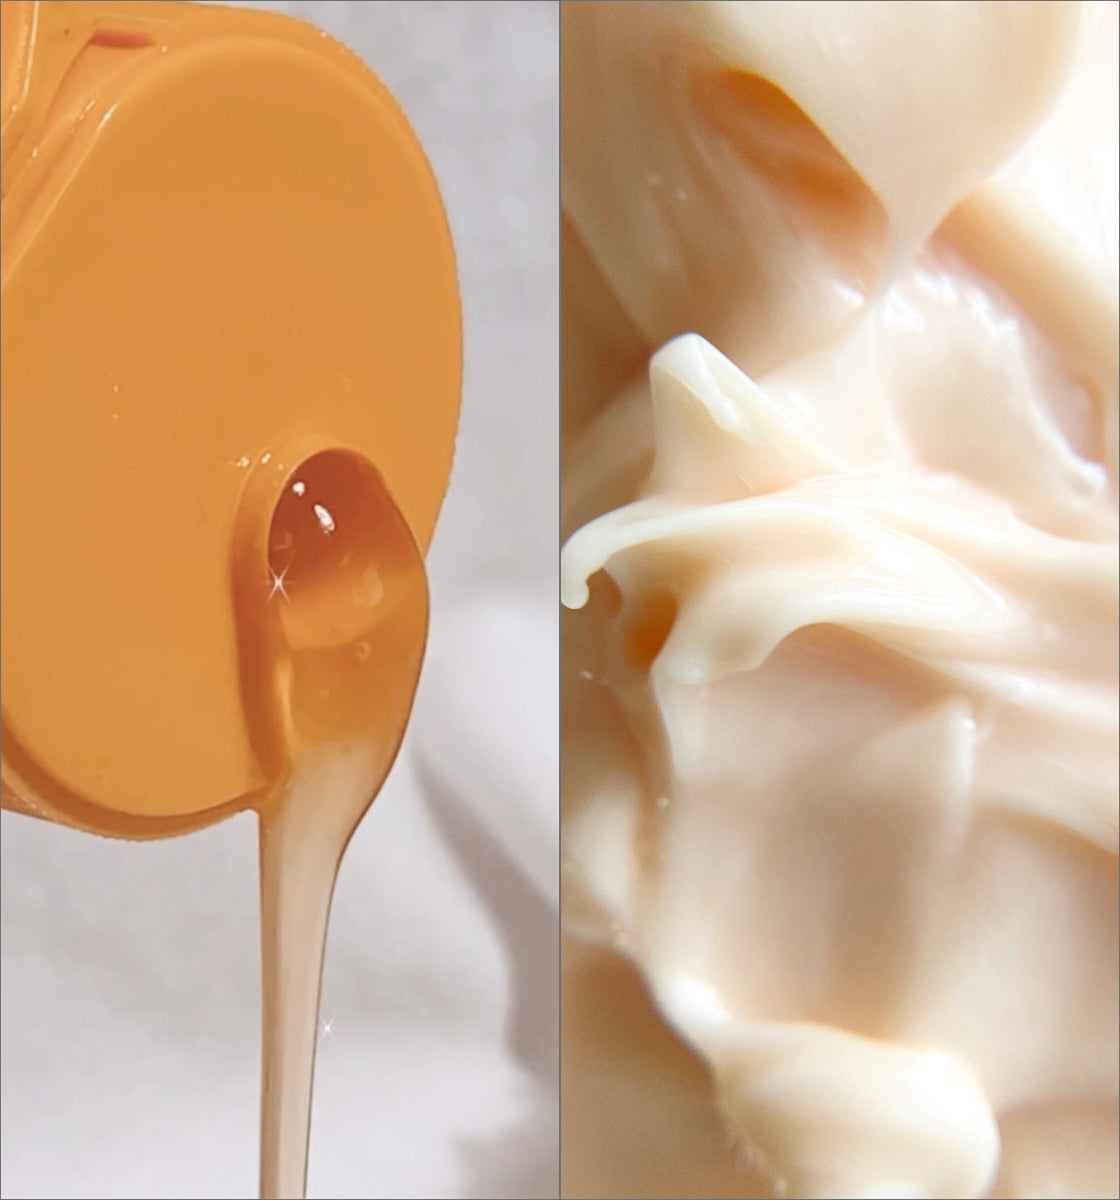 Mango and Cherry shampoo pouring out of bottle on left and close up of conditioner creamy texture on right. 